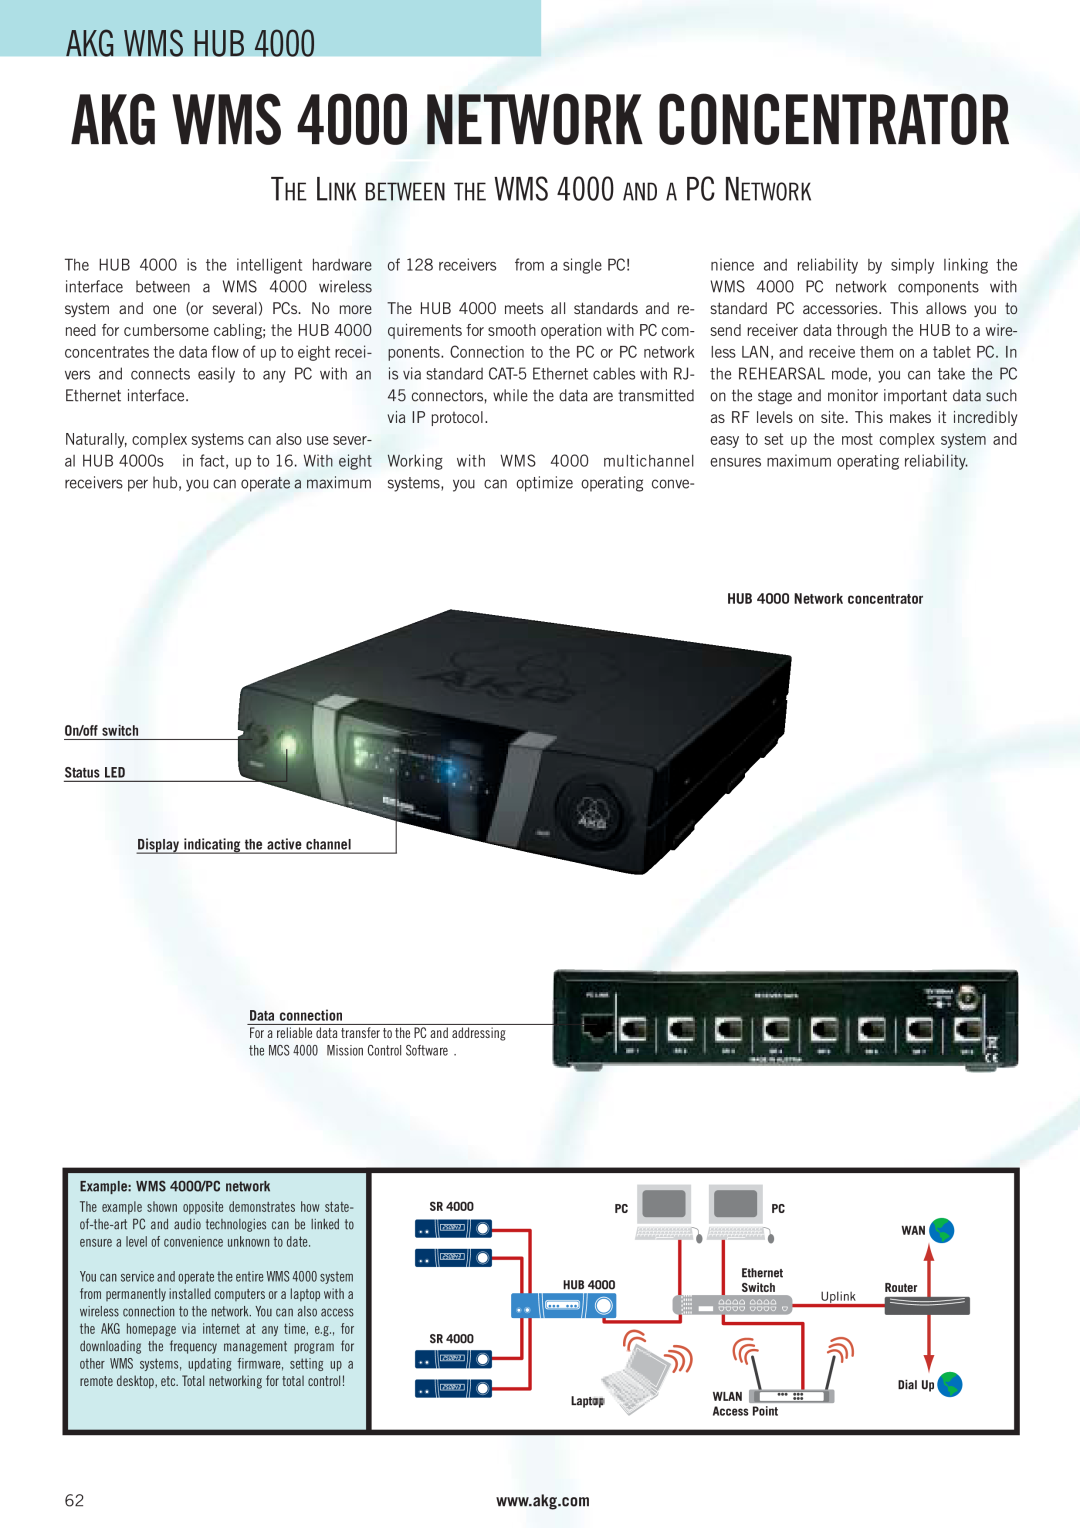 AKG Acoustics manual Akg Wms Hub, THE LINK BETWEEN THE WMS 4000 AND A PC NETWORK, AKG WMS 4000 NETWORK CONCENTRATOR 